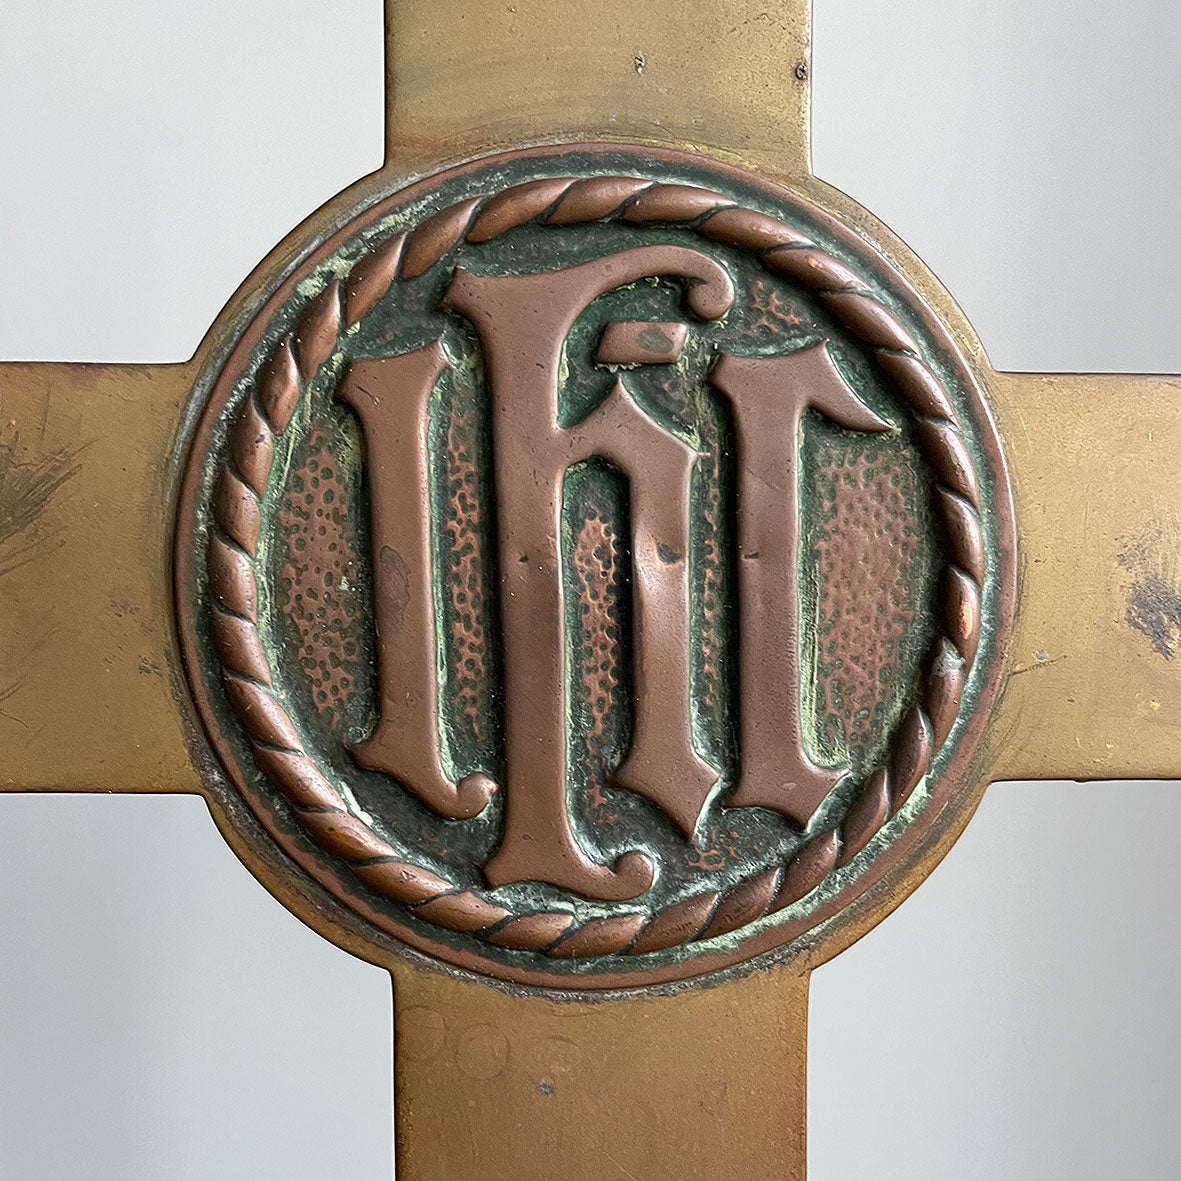 A Large Brass Alter Cross with a round copper motif and a lion foot base. Nice chunky and heavenly heavy! SHOP NOW - www.intovintage.co.uk